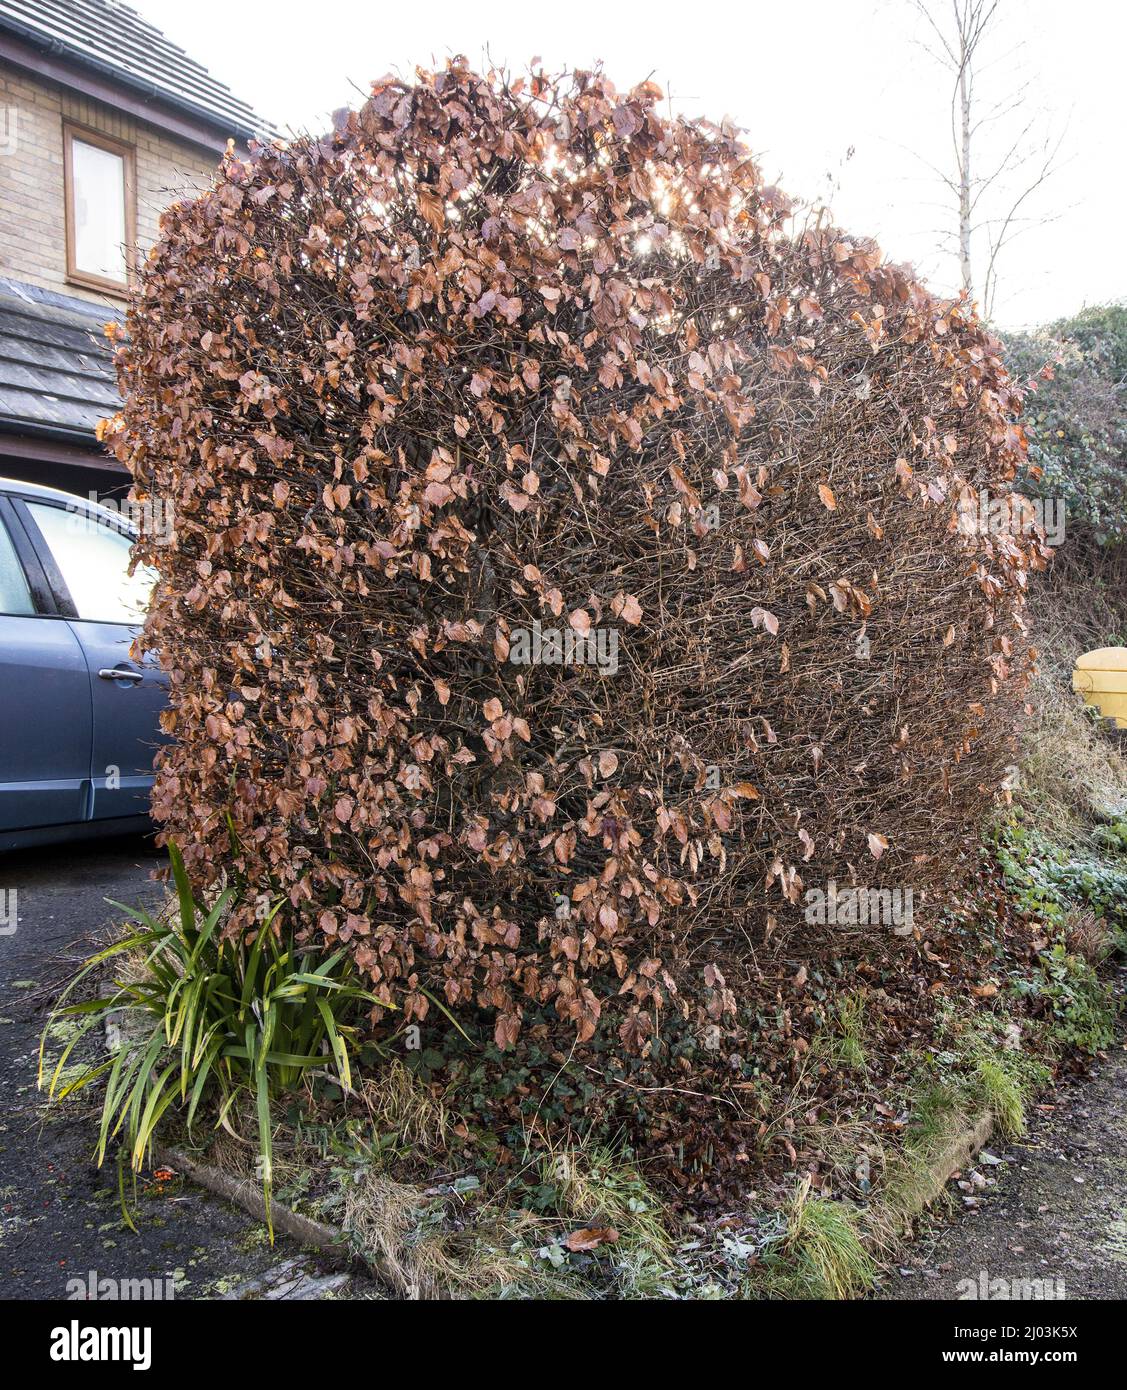 Beech hedge prior to winter cutting back, Wales, UK, see 2J03K6N and 2J03k68 Stock Photo